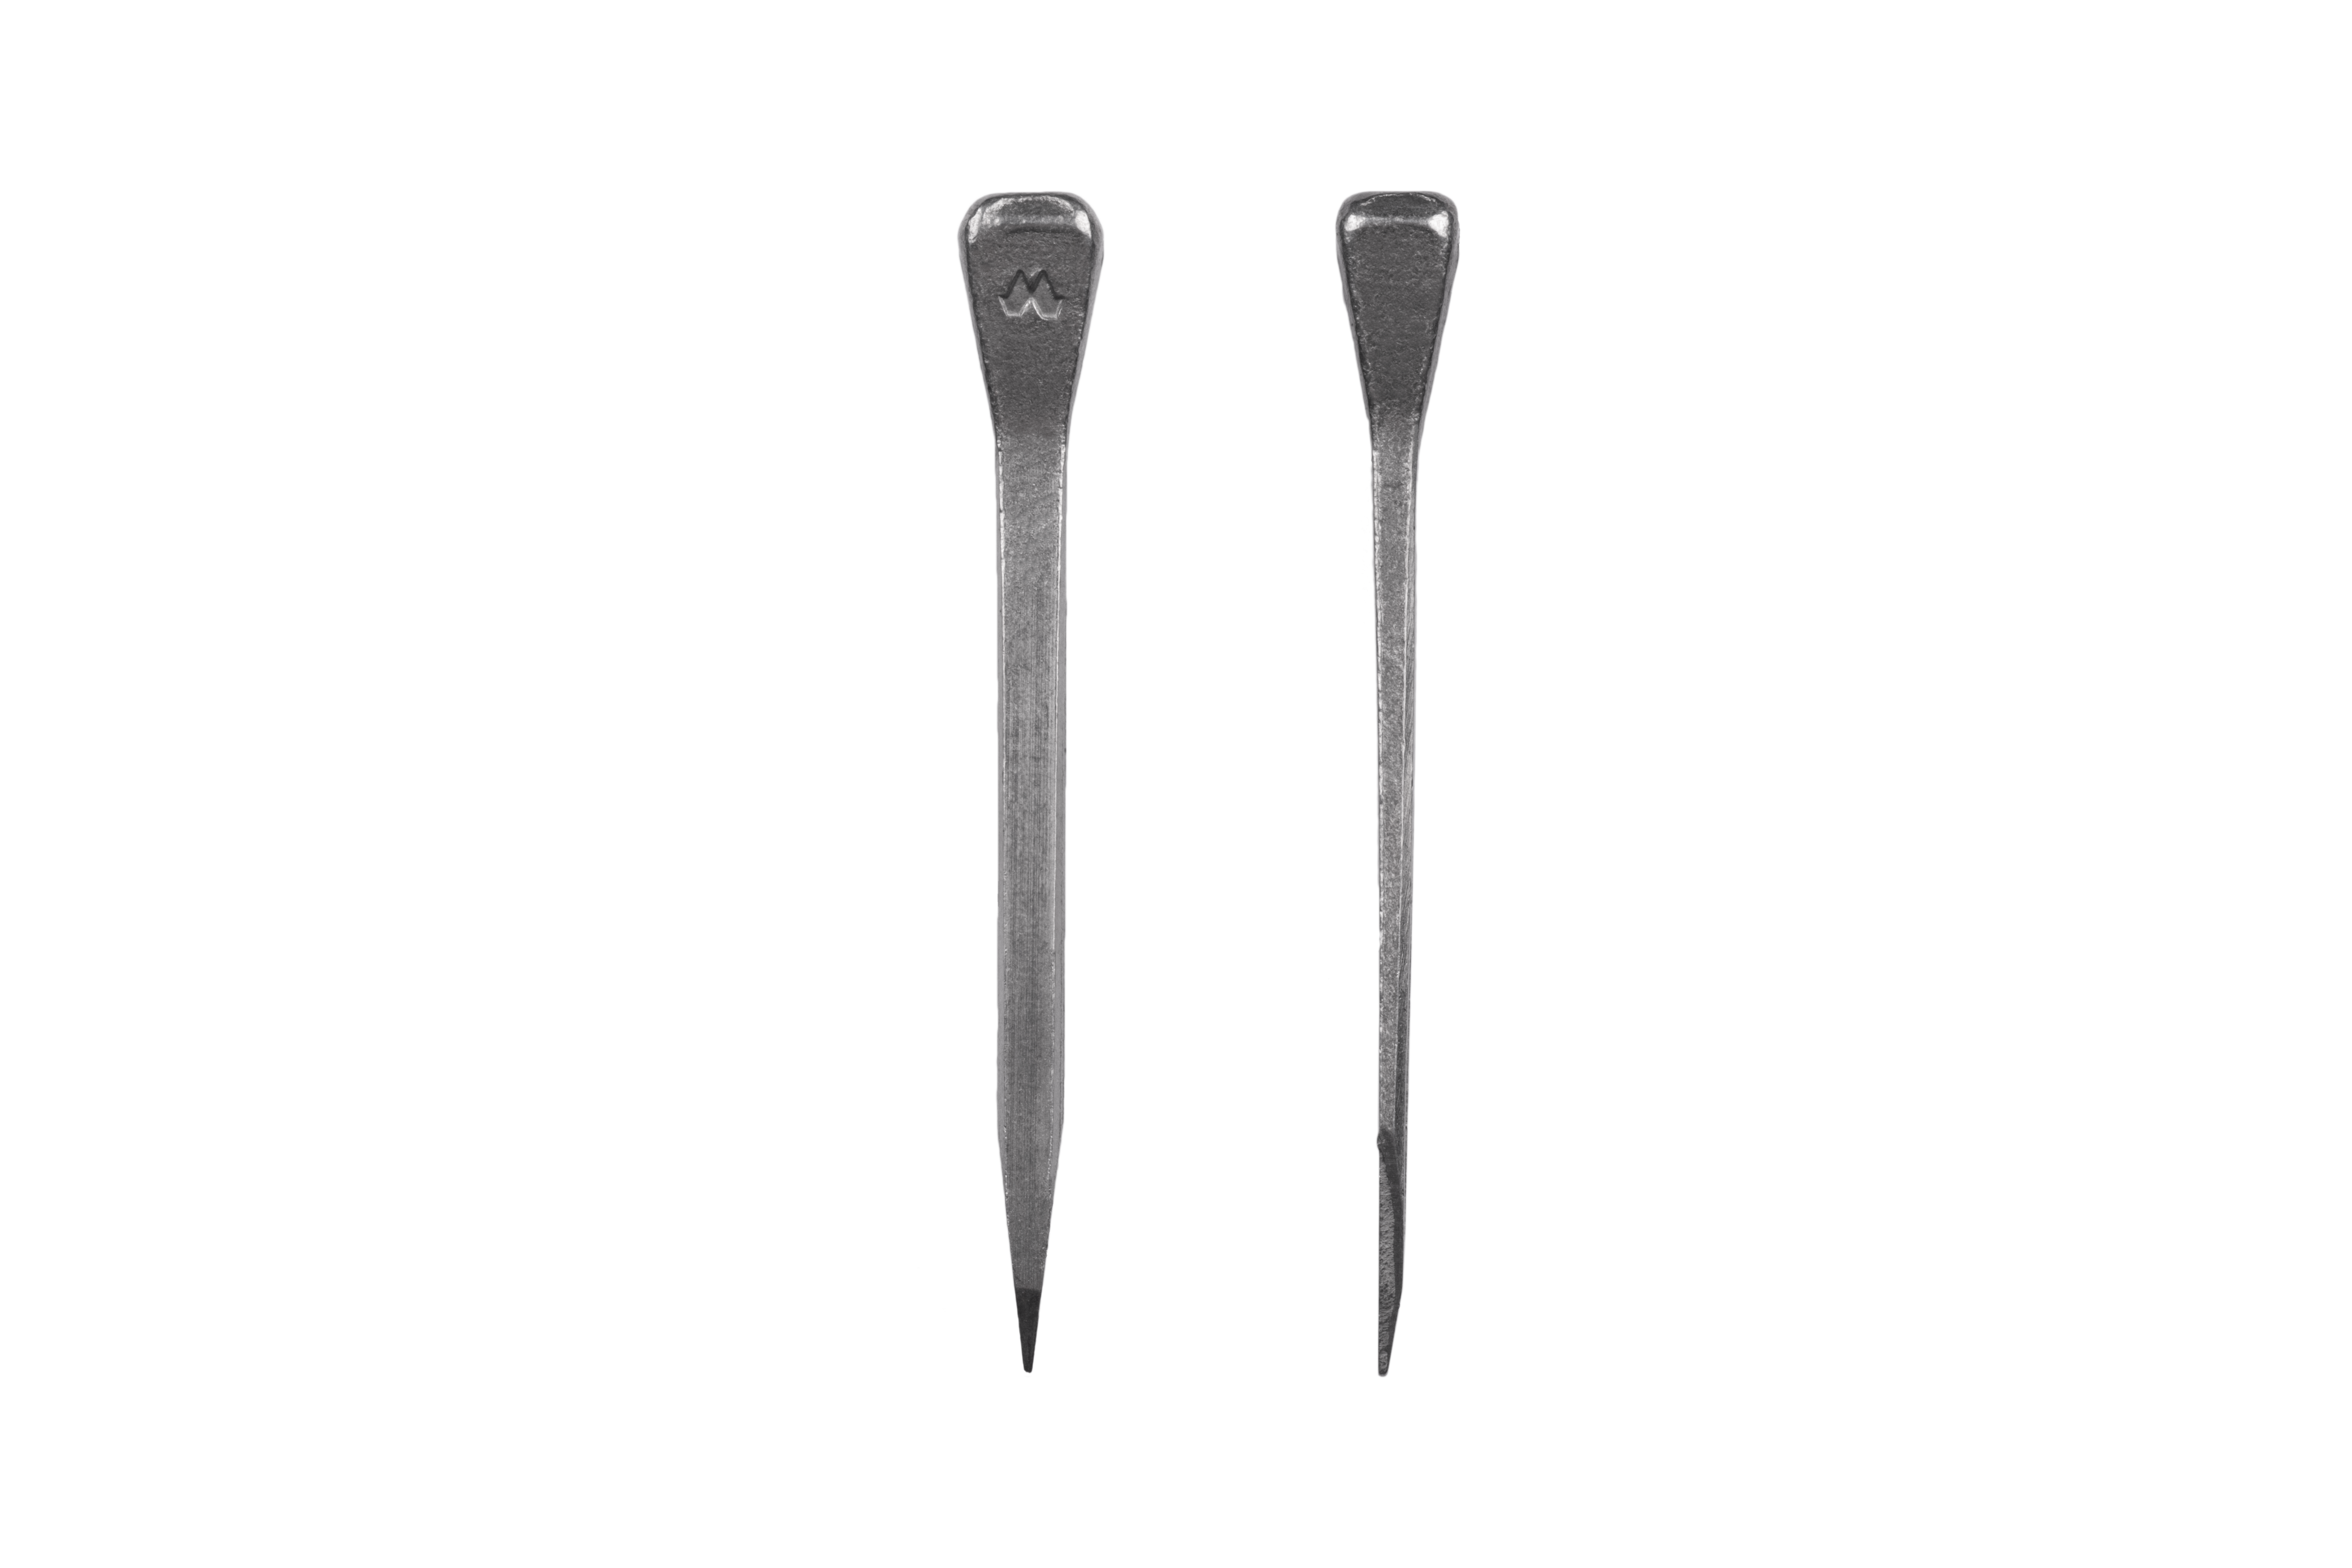 This long neck quality nail will be ideal for shoeing Draft horses, and will provide a strong bond between the heavy duty shoes and the big hooves of our working horses. 